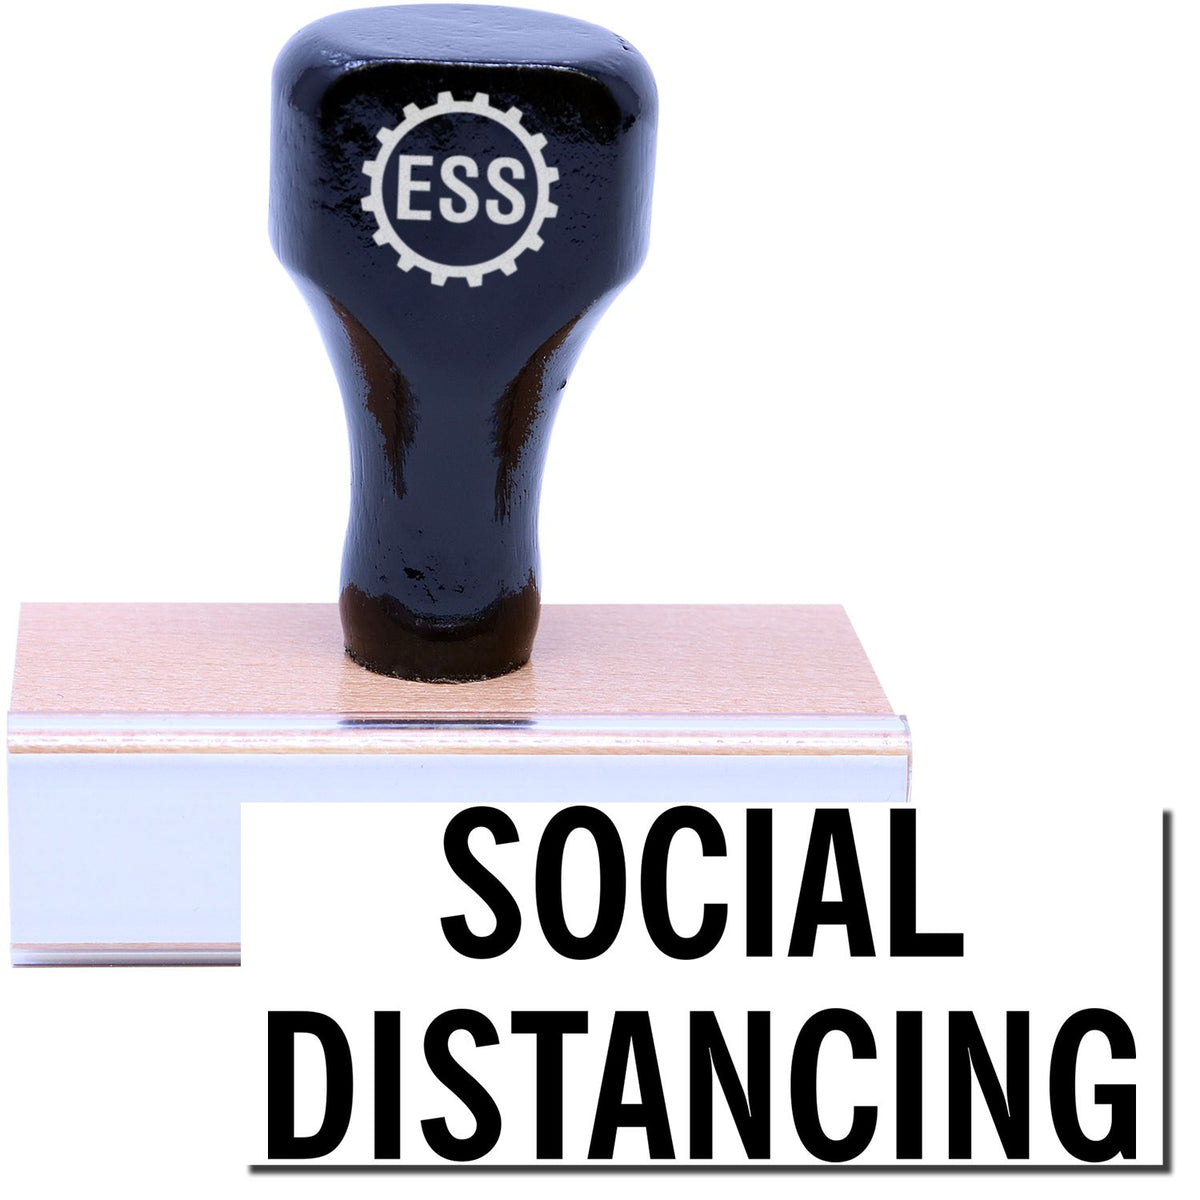 A stock office rubber stamp with a stamped image showing how the text &quot;SOCIAL DISTANCING&quot; in a large font is displayed after stamping.